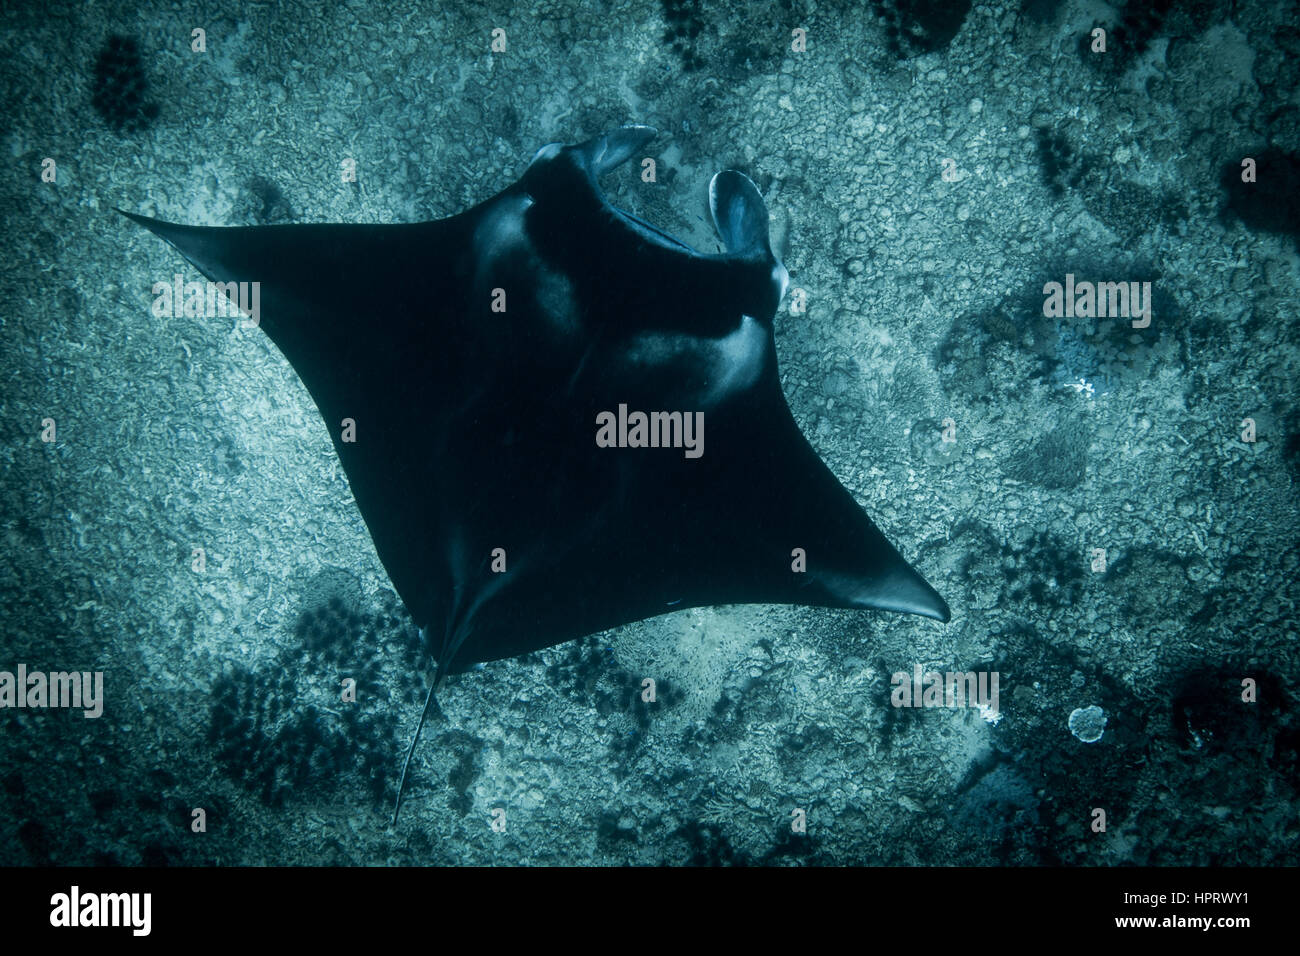 A Manta Ray - Manta alfredi - swims over the rubble reef at Manta point. Taken in Komodo National Park, Indonesia. Stock Photo